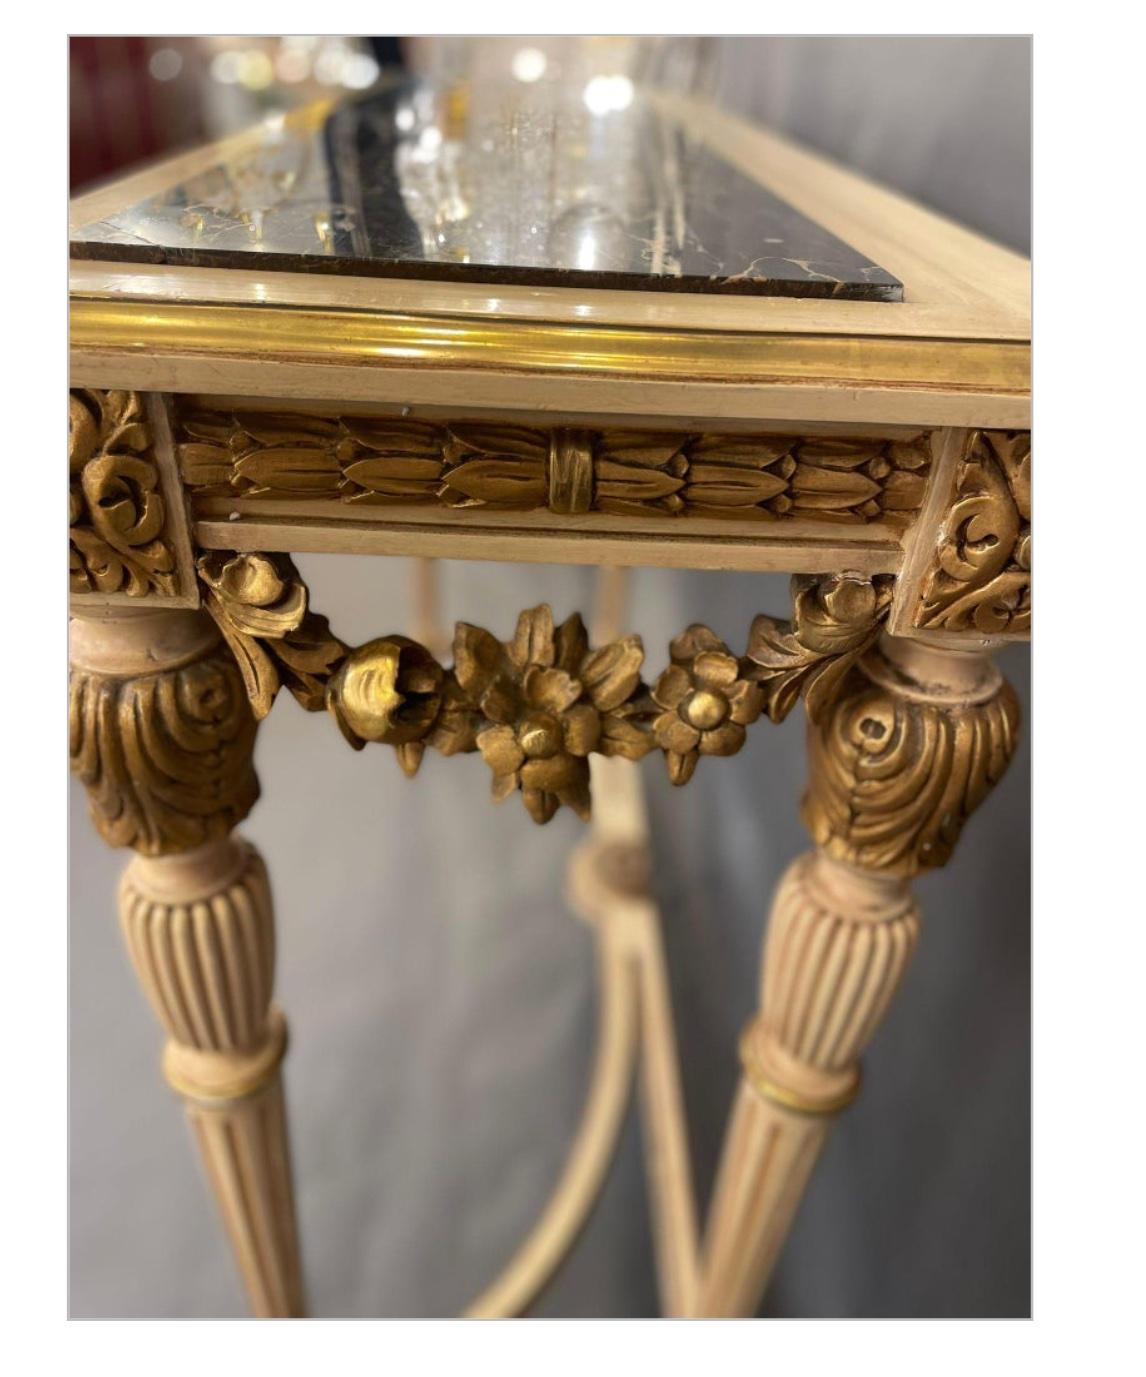 Louis XVI Style Marble Topped Gilt-Wood Console Table, circa 1890s For Sale 4